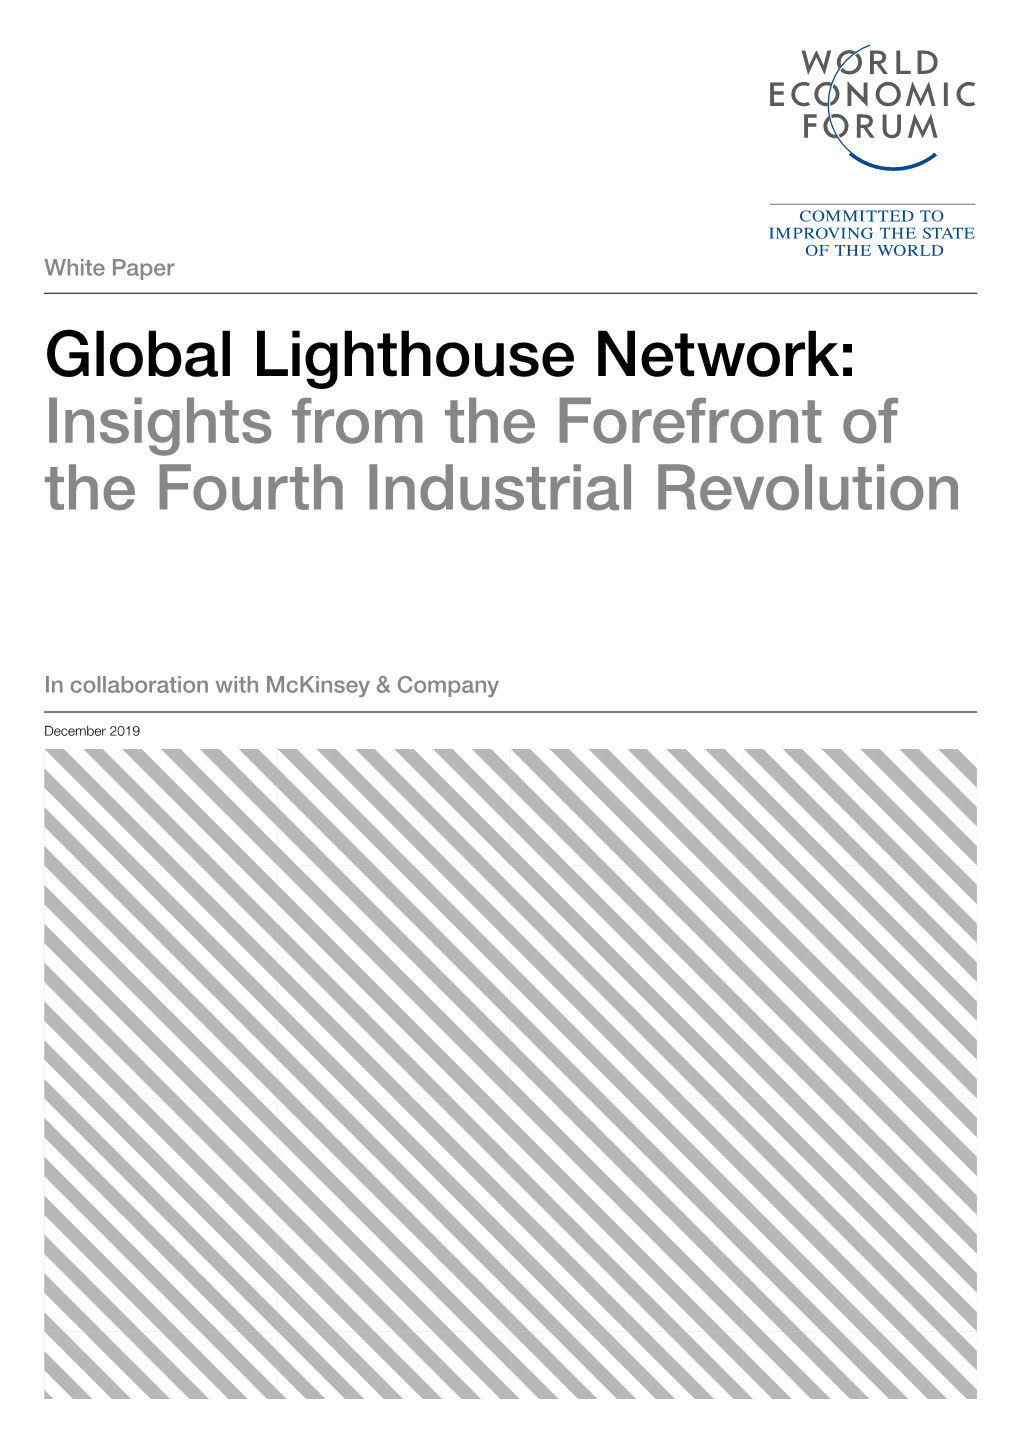 Global Lighthouse Network: Insights from the Forefront of the Fourth Industrial Revolution